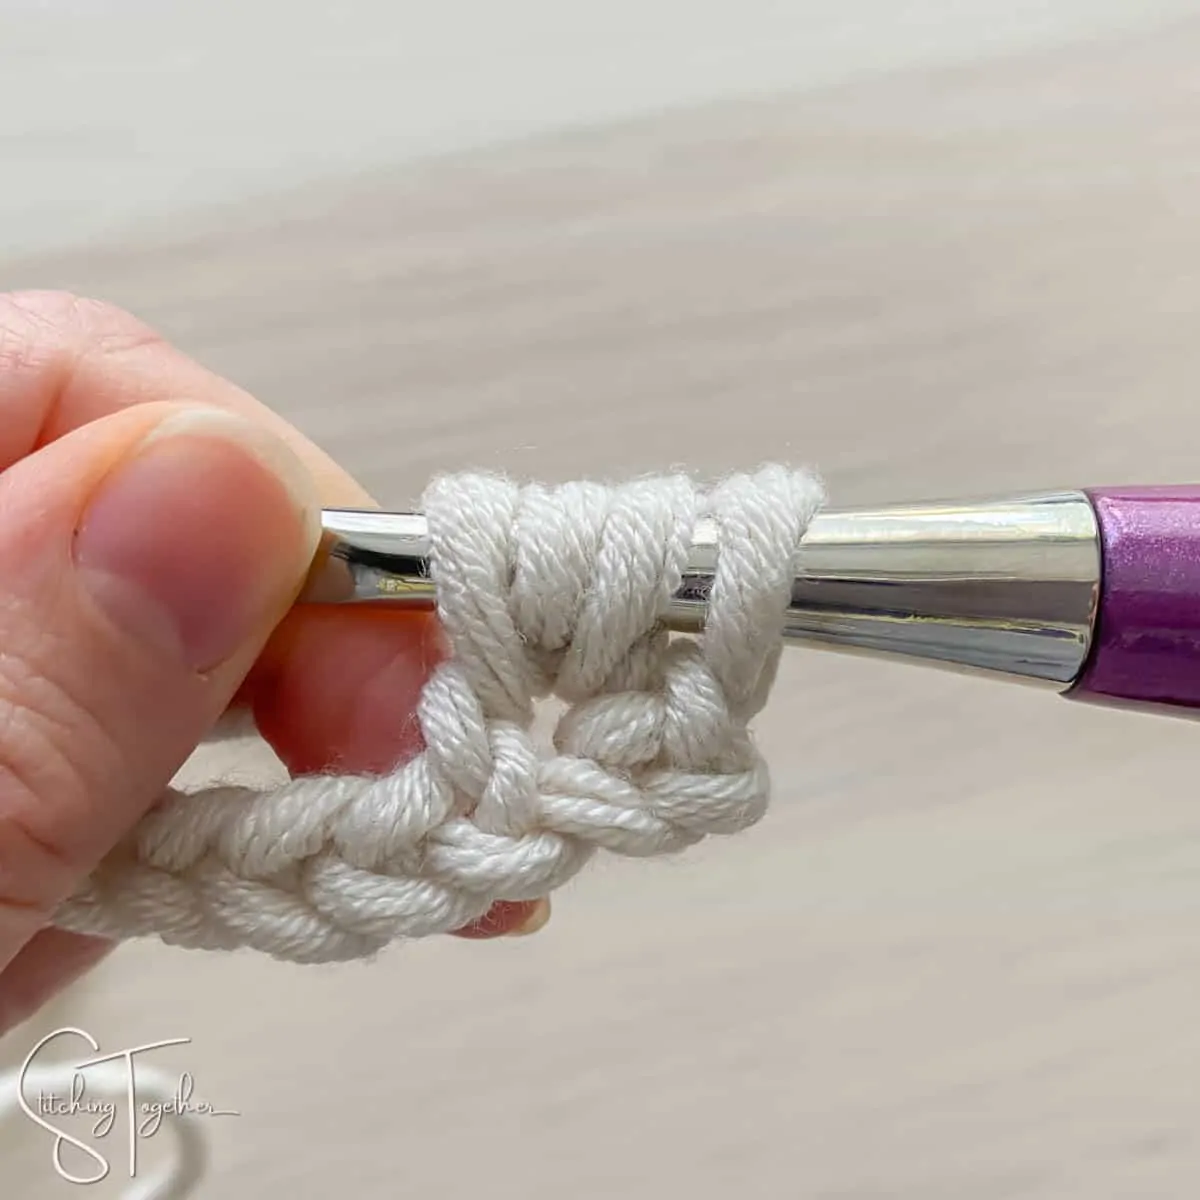 yarn over, insert hook into same st and pull up a loop